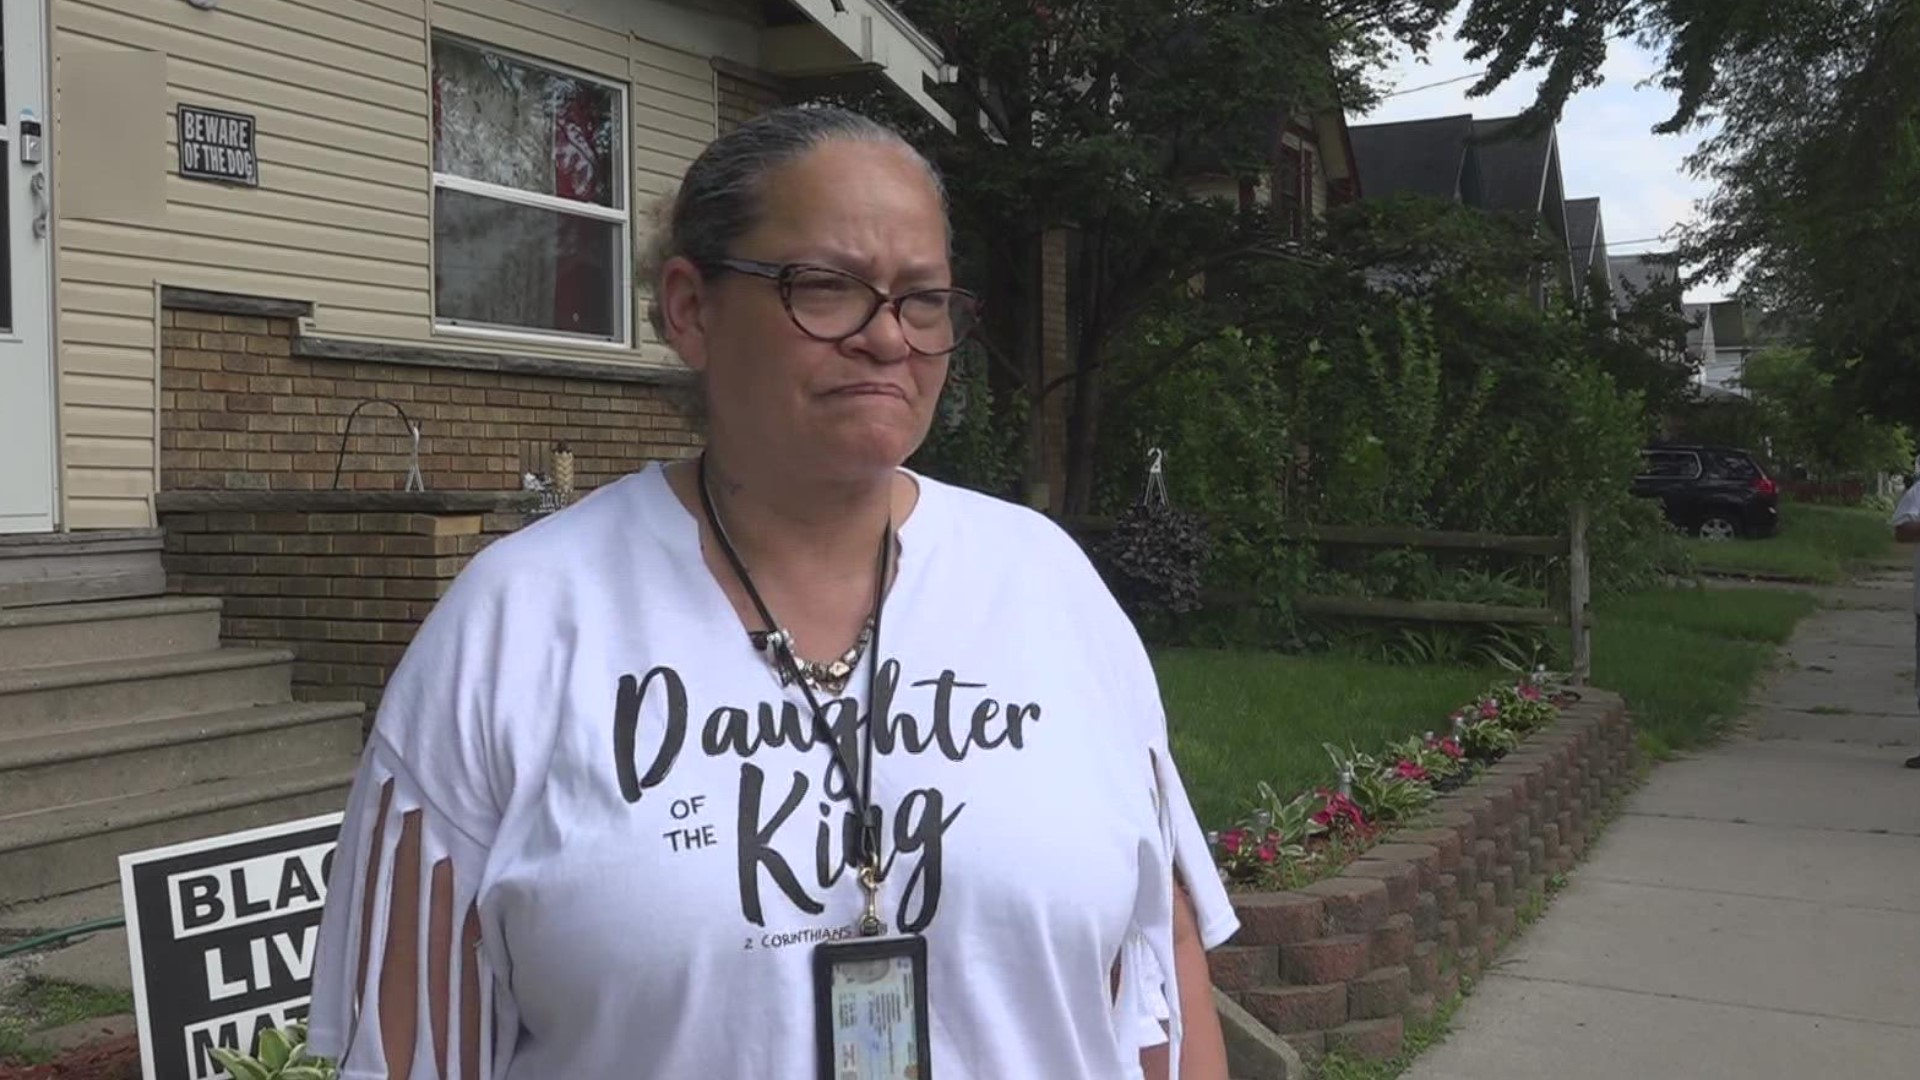 Ele DeRomano's car was stolen and crashed on Memorial Day. But instead of seeking justice or jail time, she's hoping to help the thieves reform, just like she did.